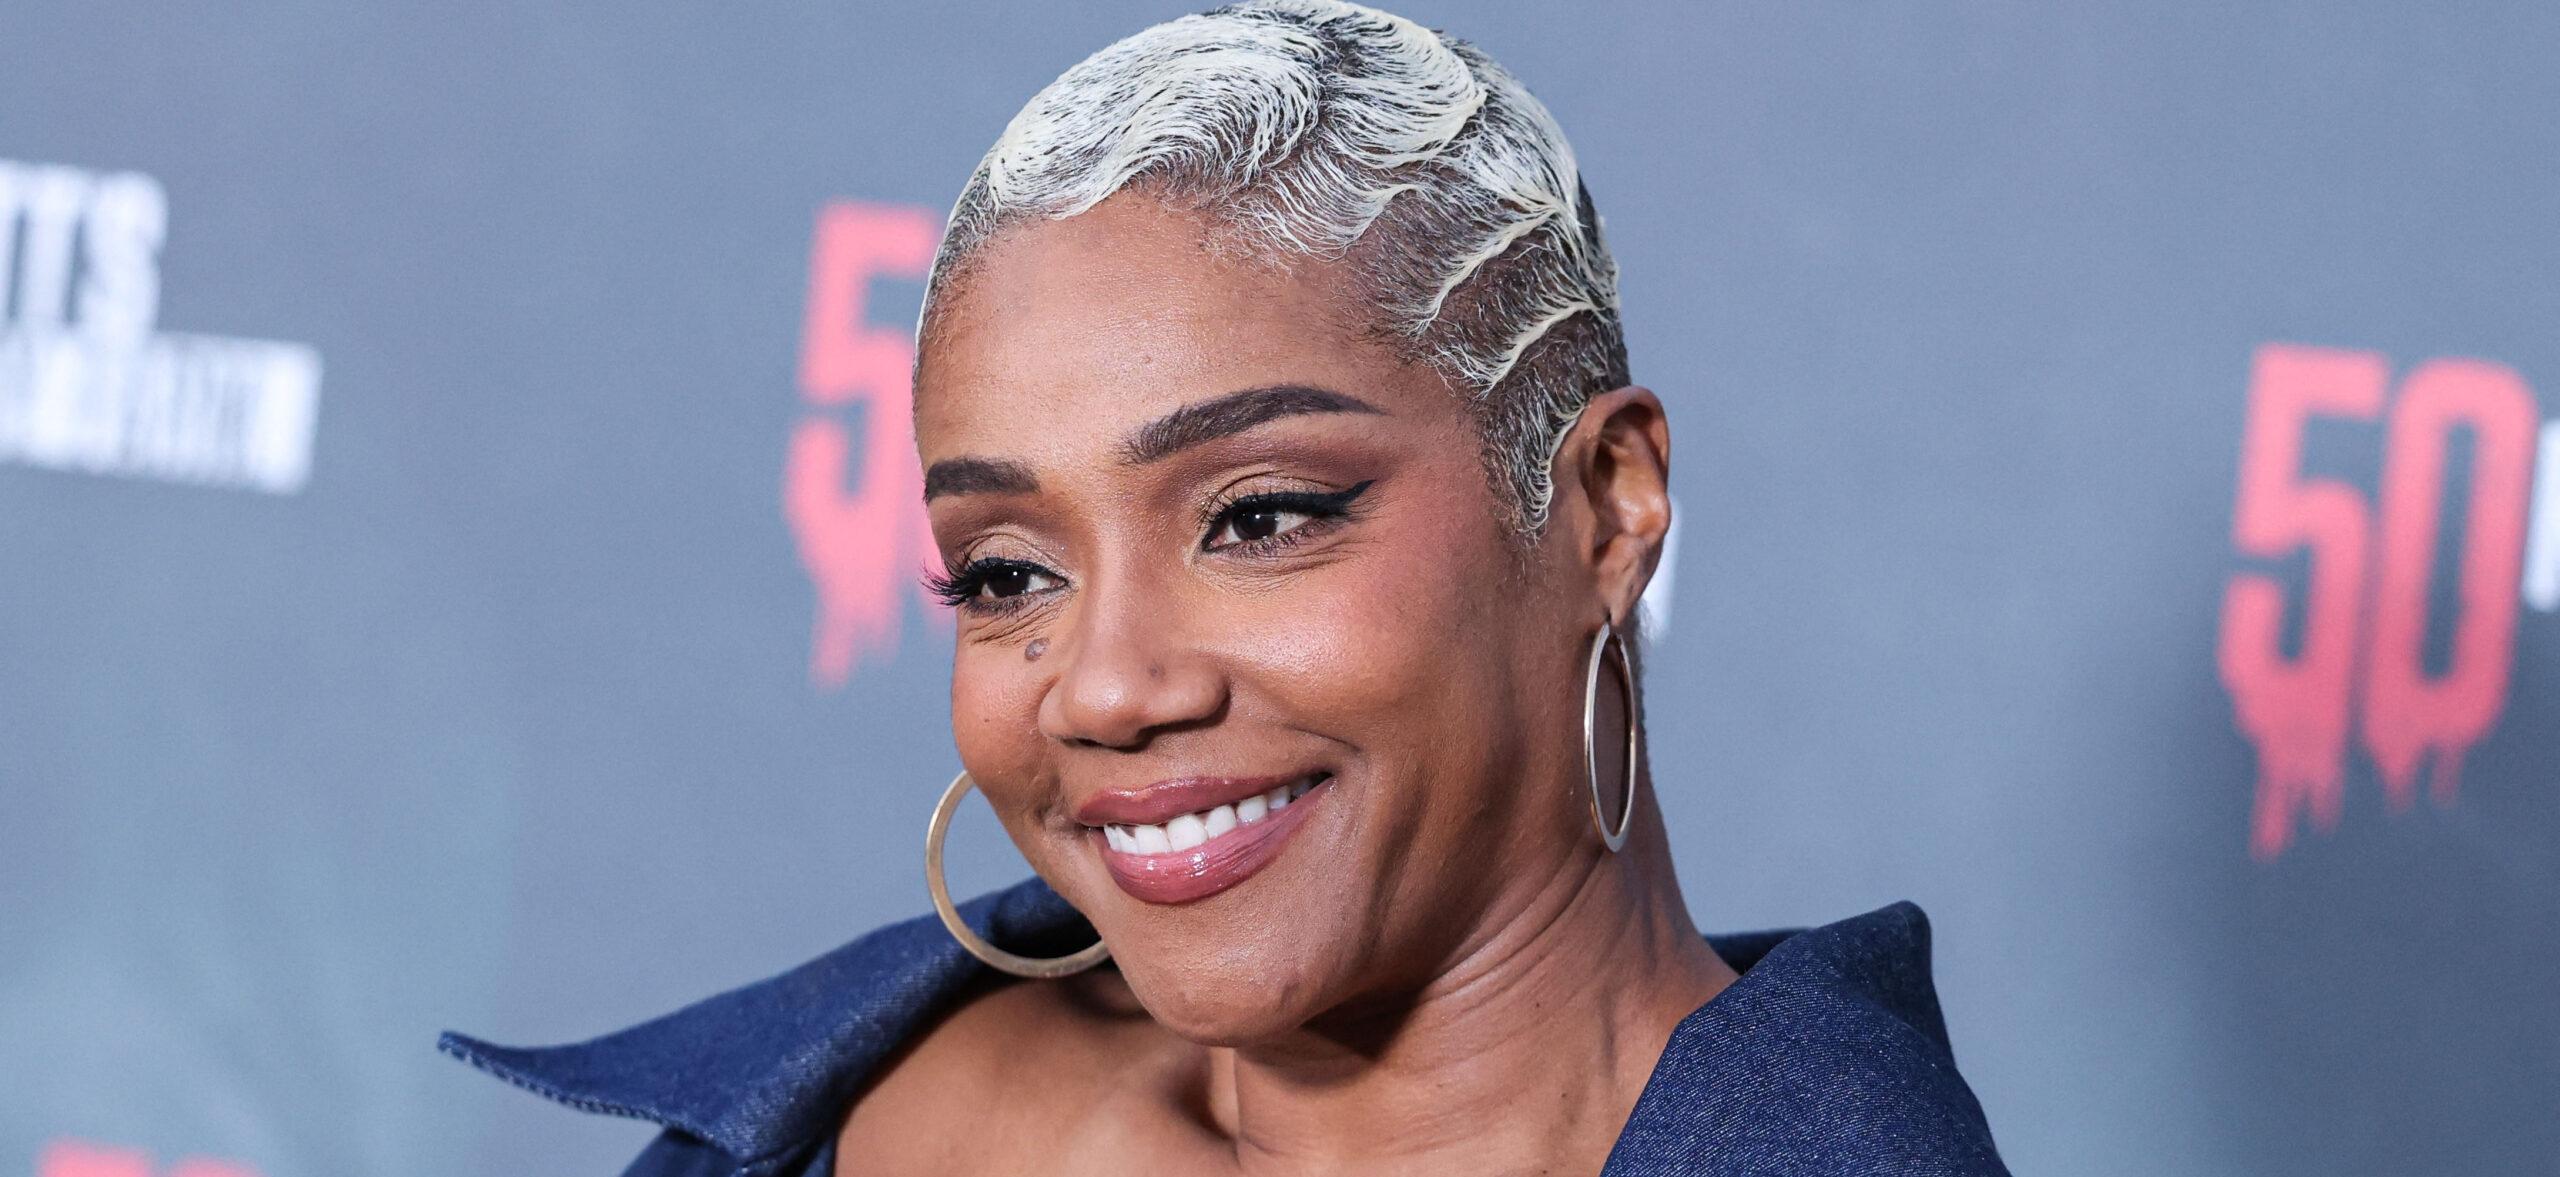 Tiffany Haddish Is ‘Ready For My Next Chapter In Life’ At 44 After DUI Arrest